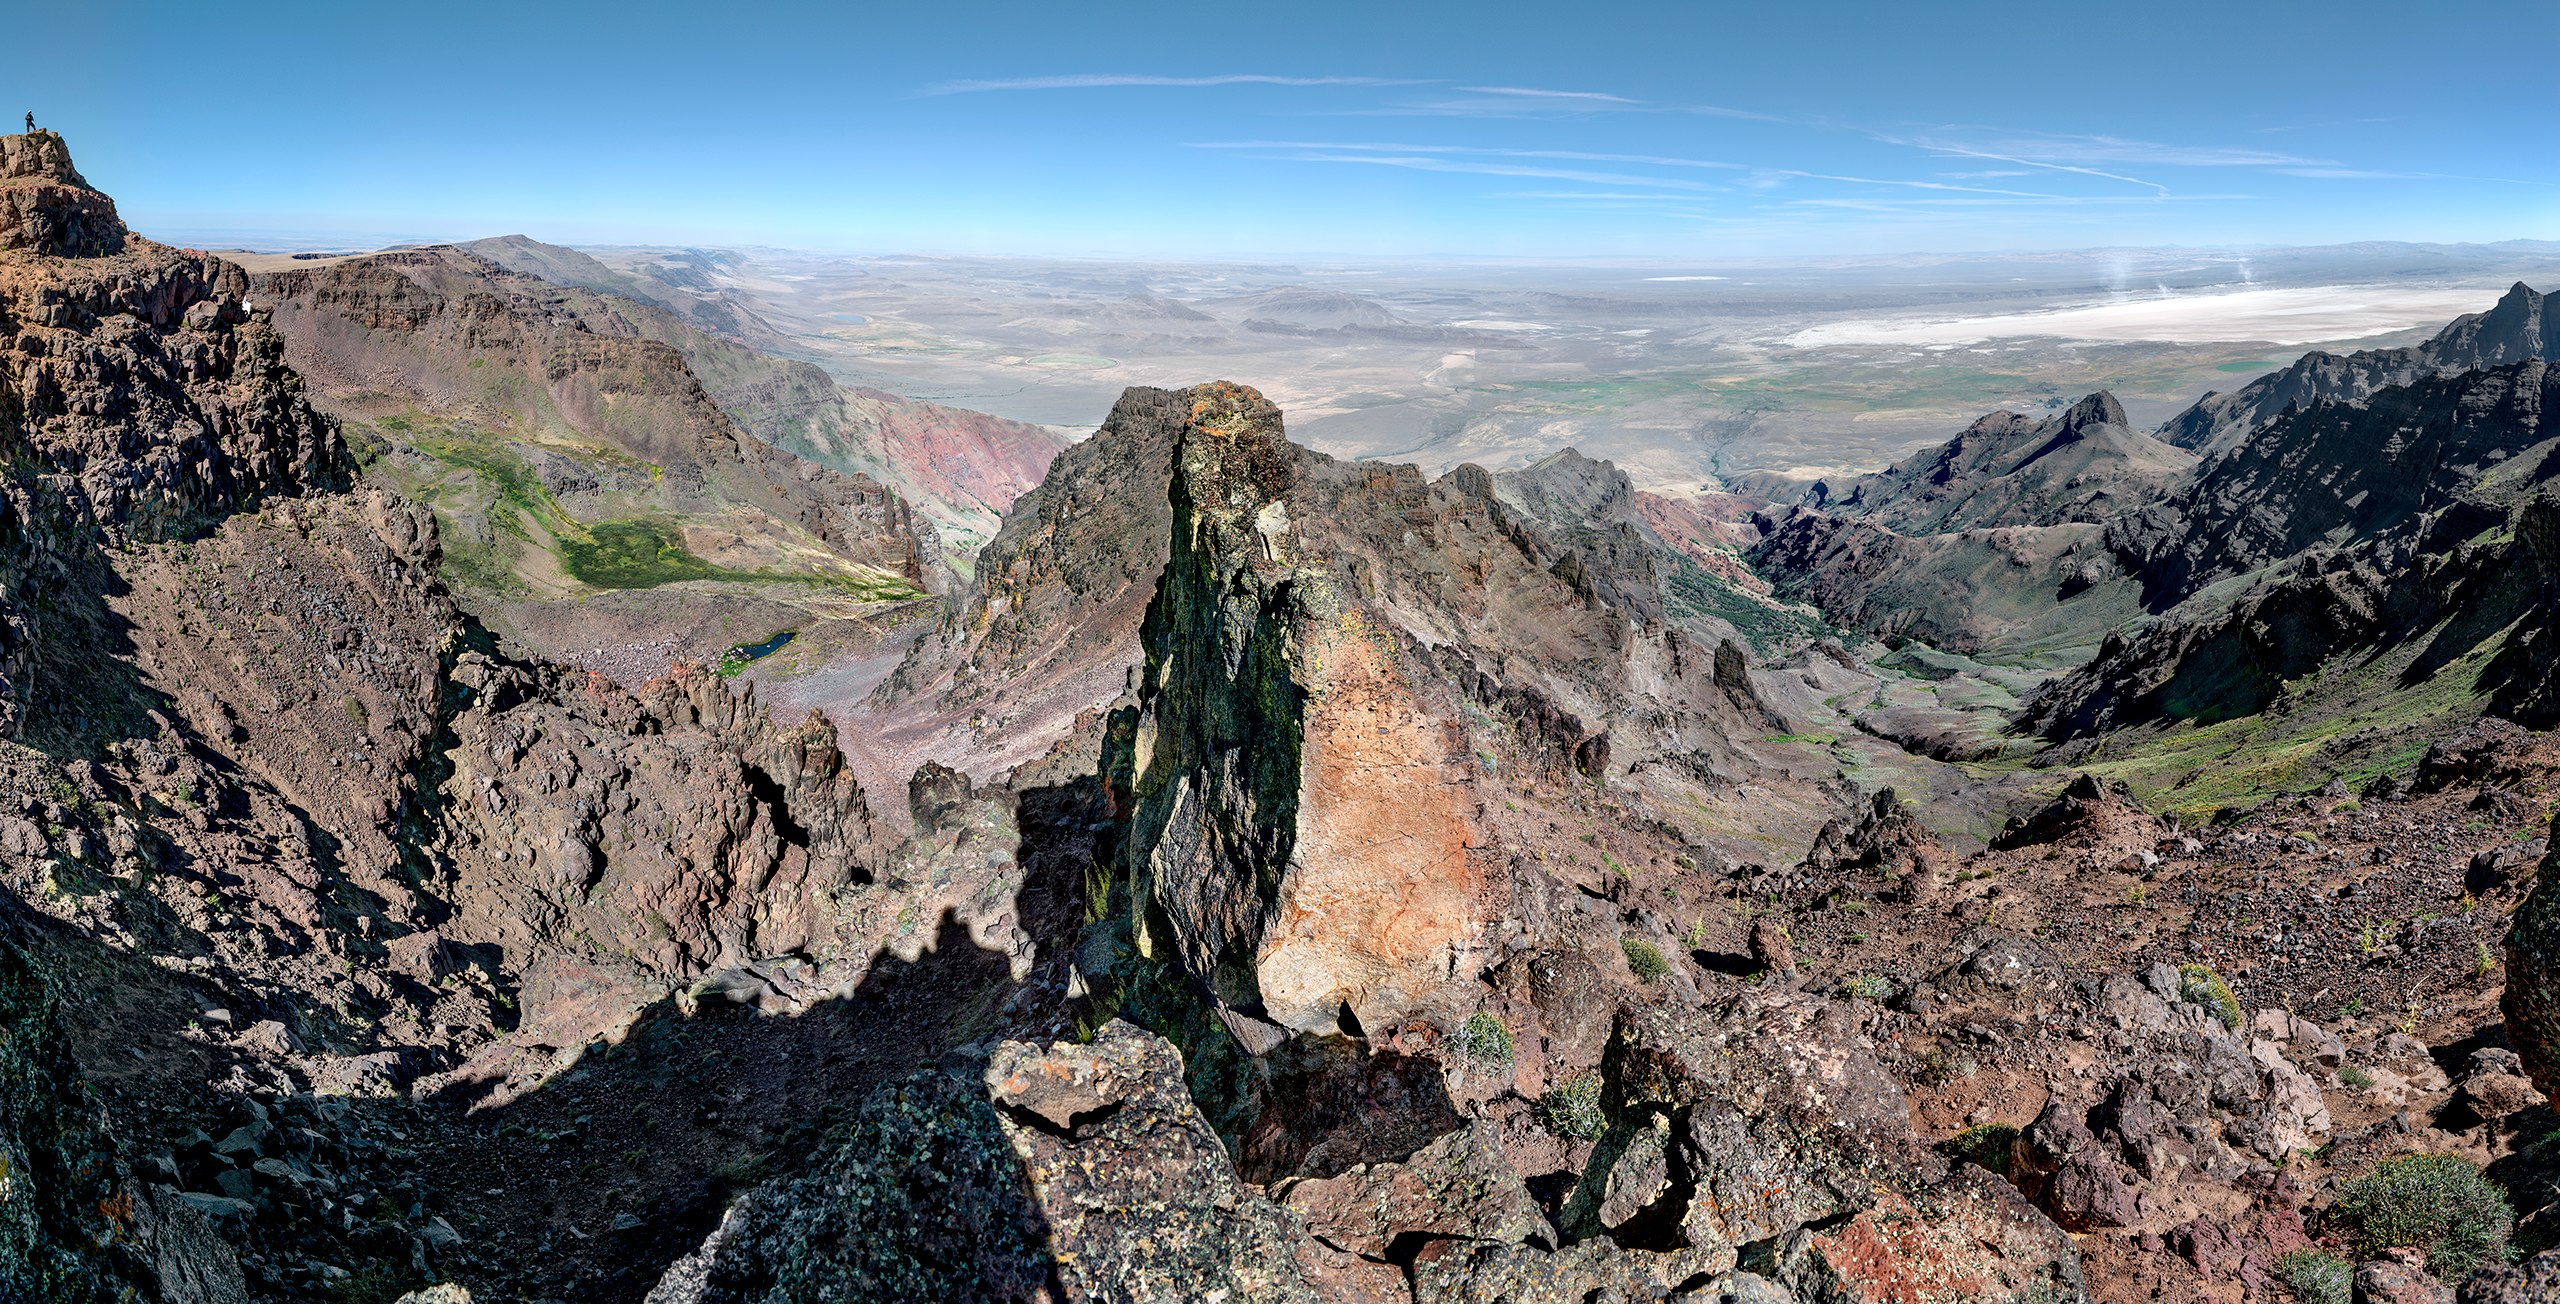 View East from crest of Steens Mountain, Oregon